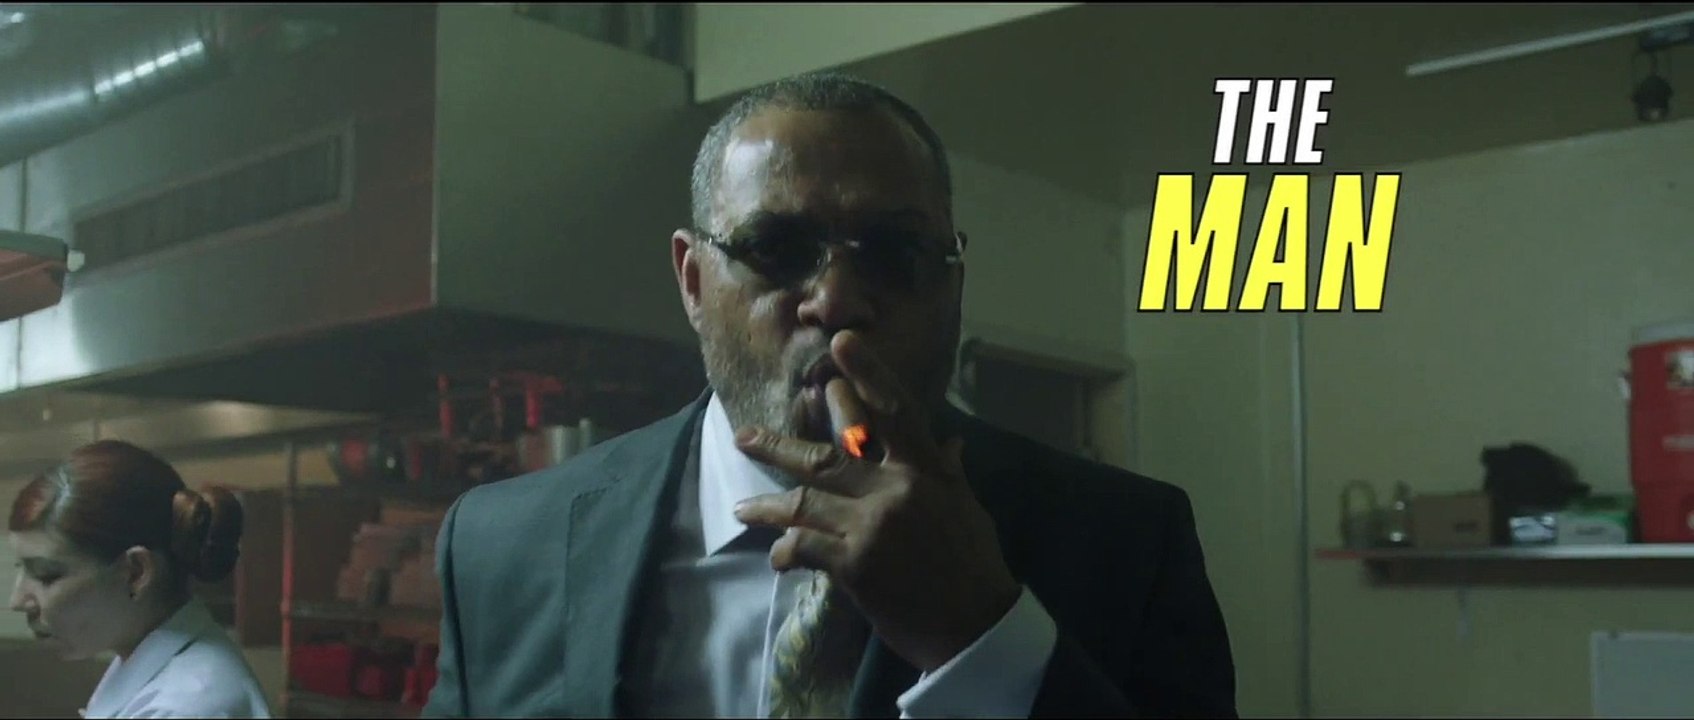 RUNNING WITH THE DEVIL Film - Laurence Fishburne ist THE MAN